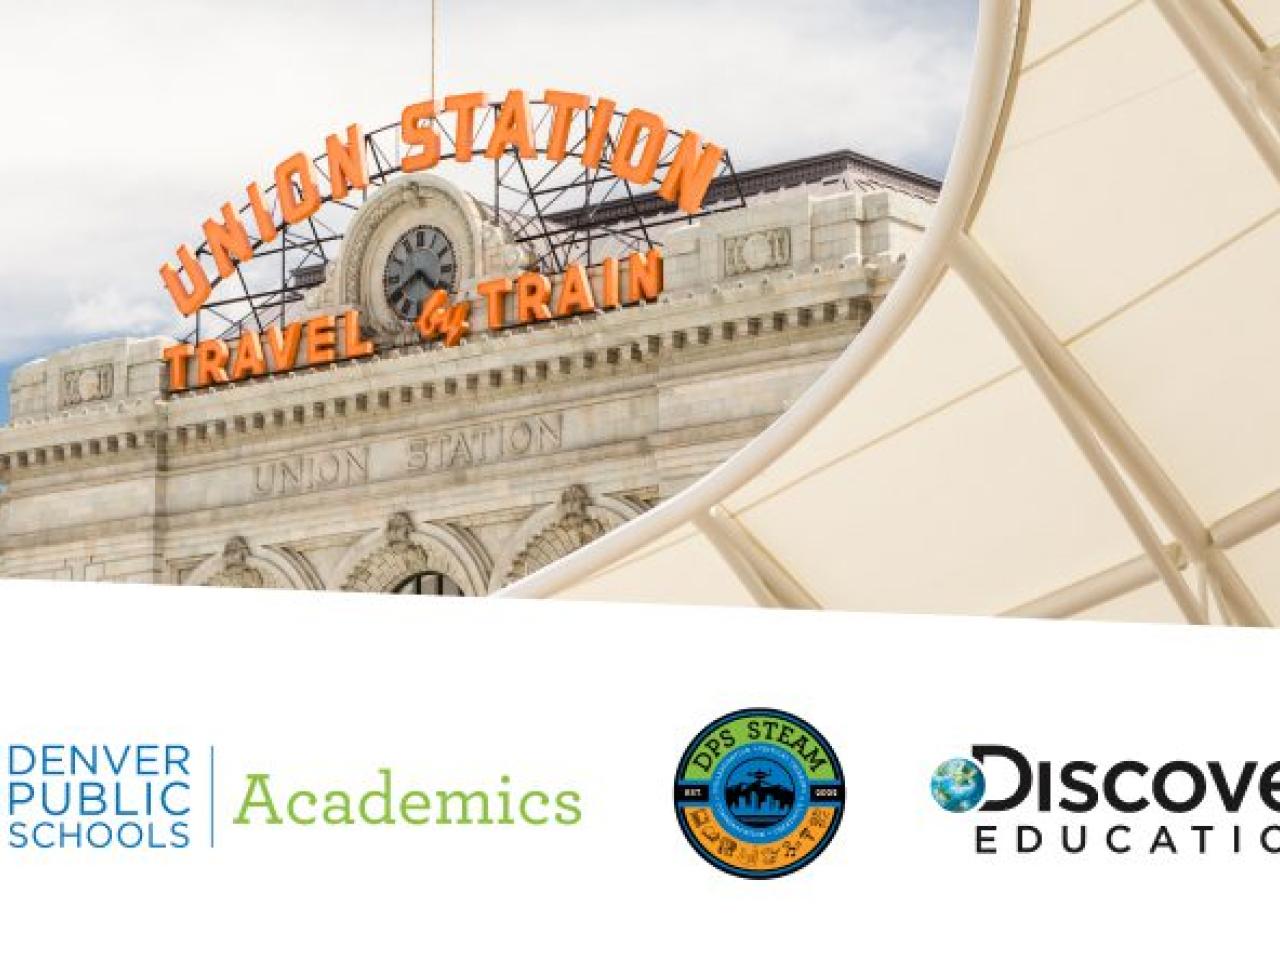 Denver Public Schools and Discovery Education logos